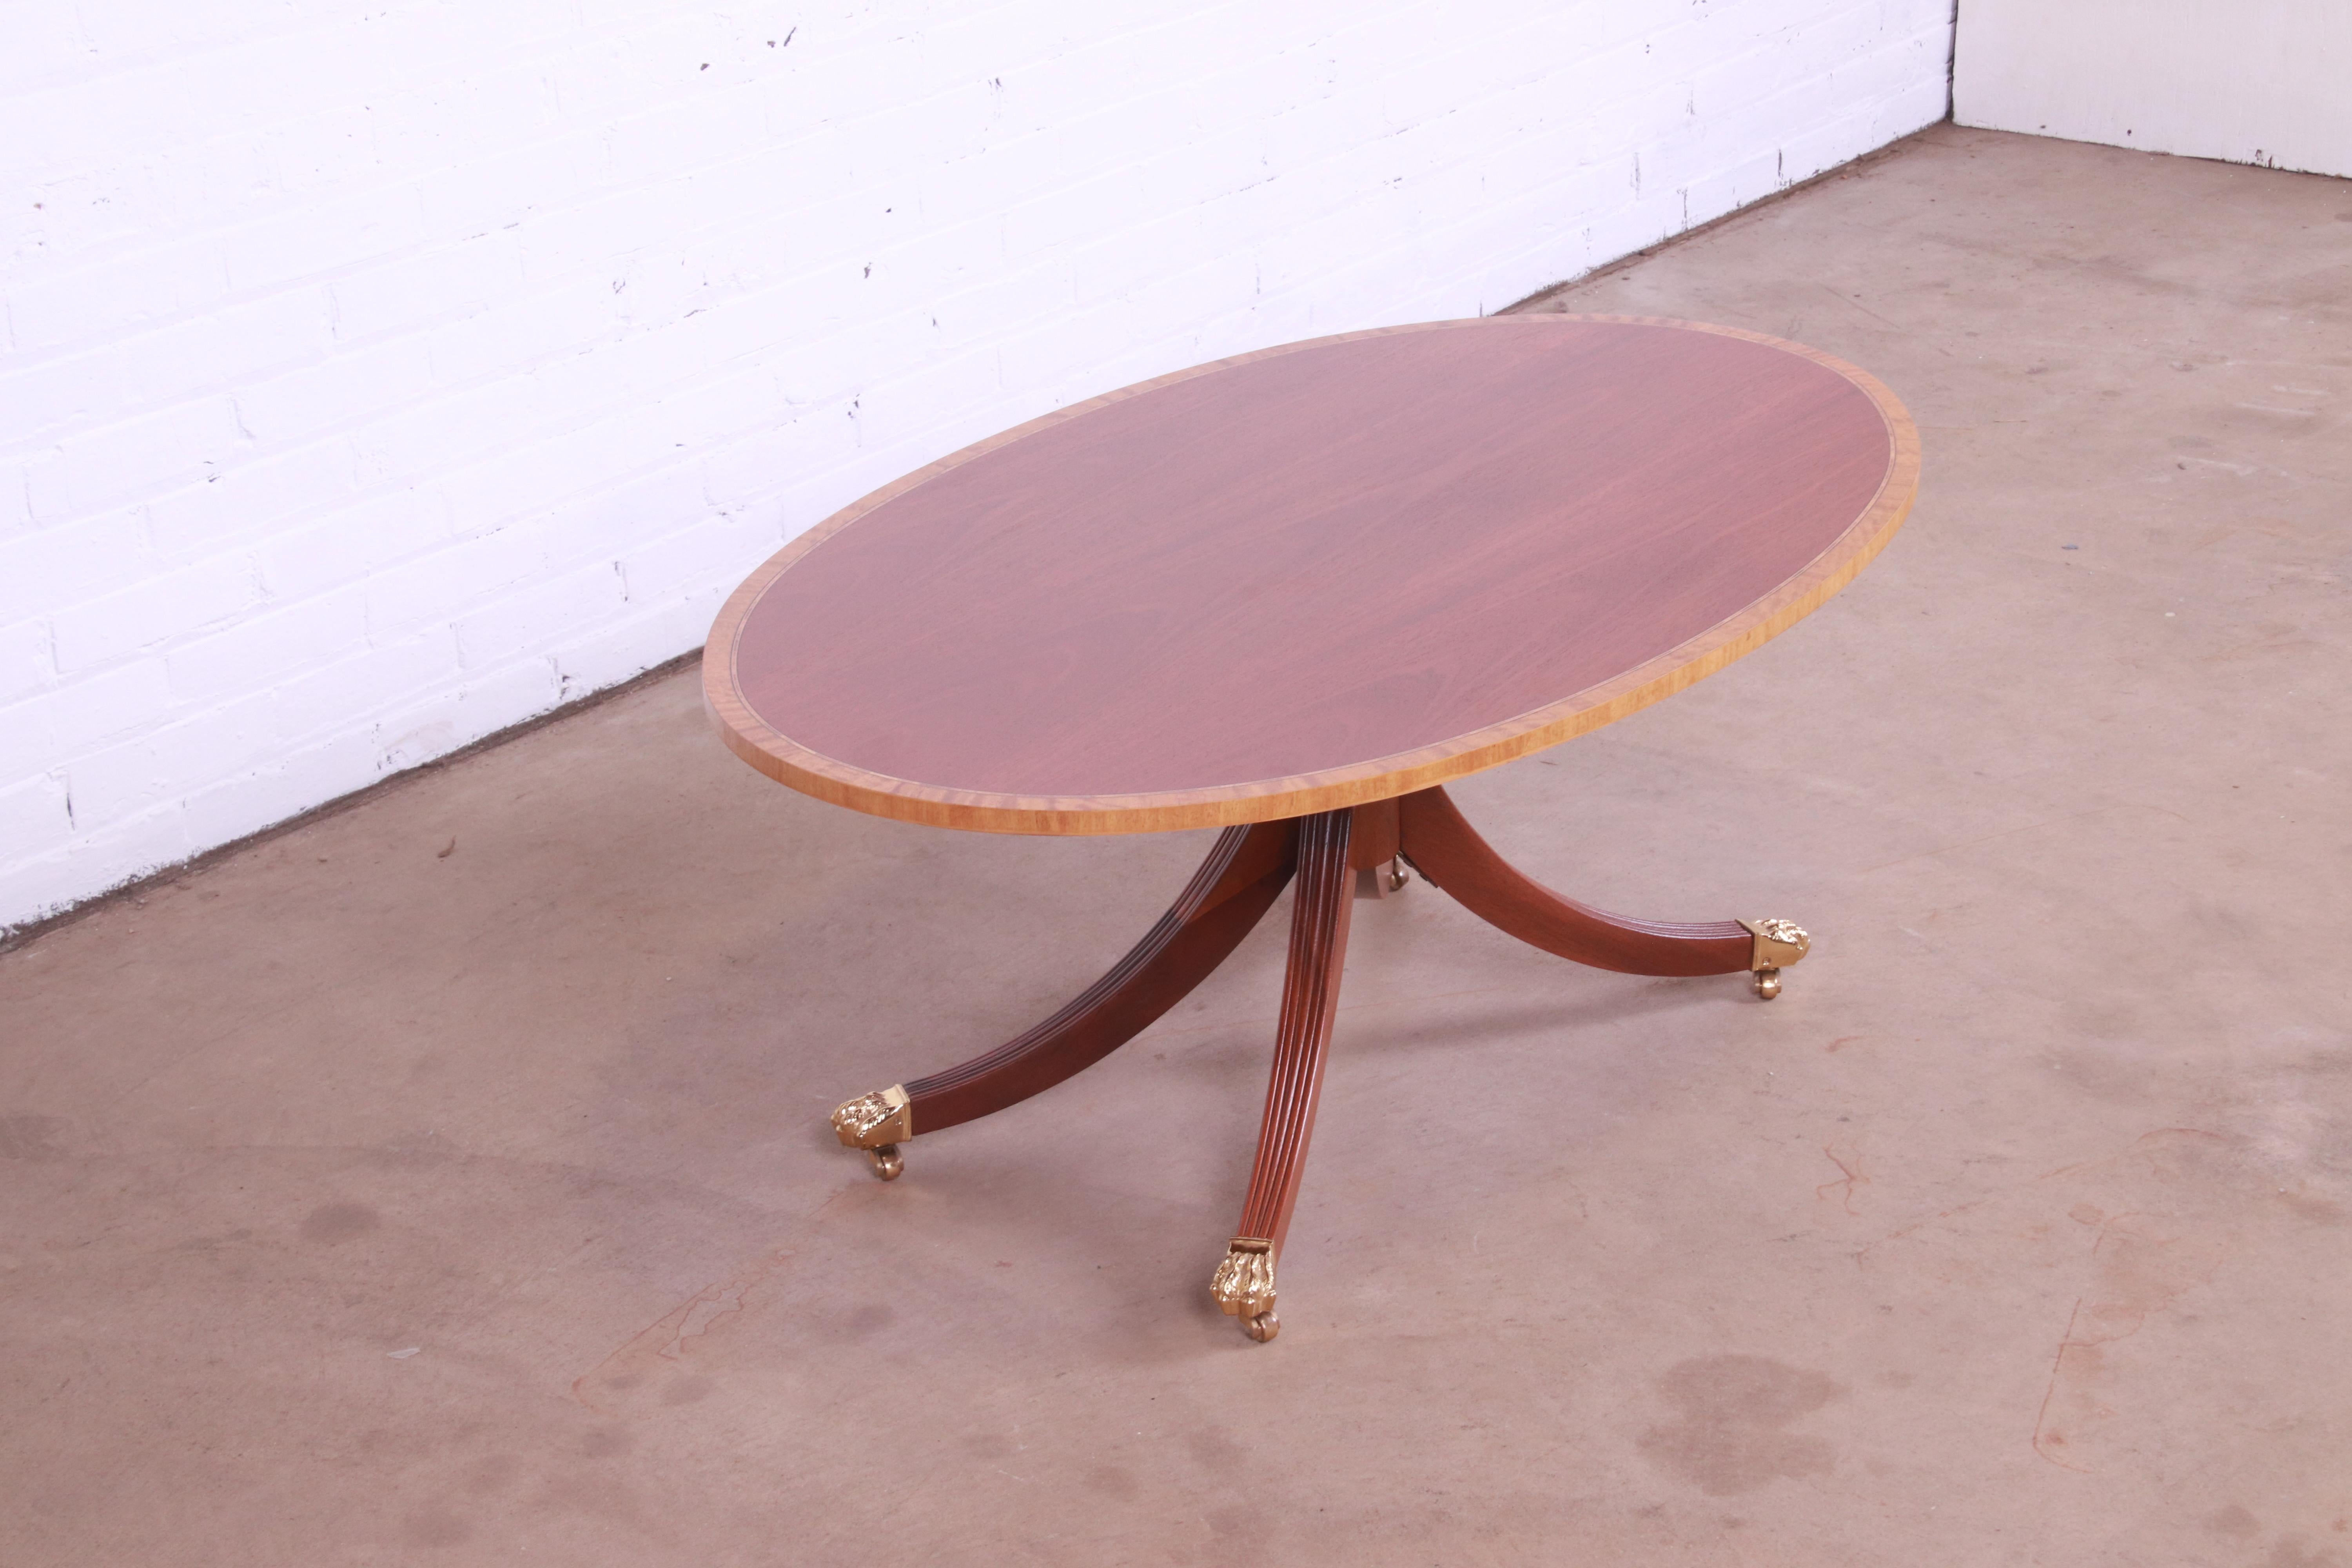 20th Century Councill Furniture Georgian Banded Mahogany Pedestal Coffee Table, Refinished